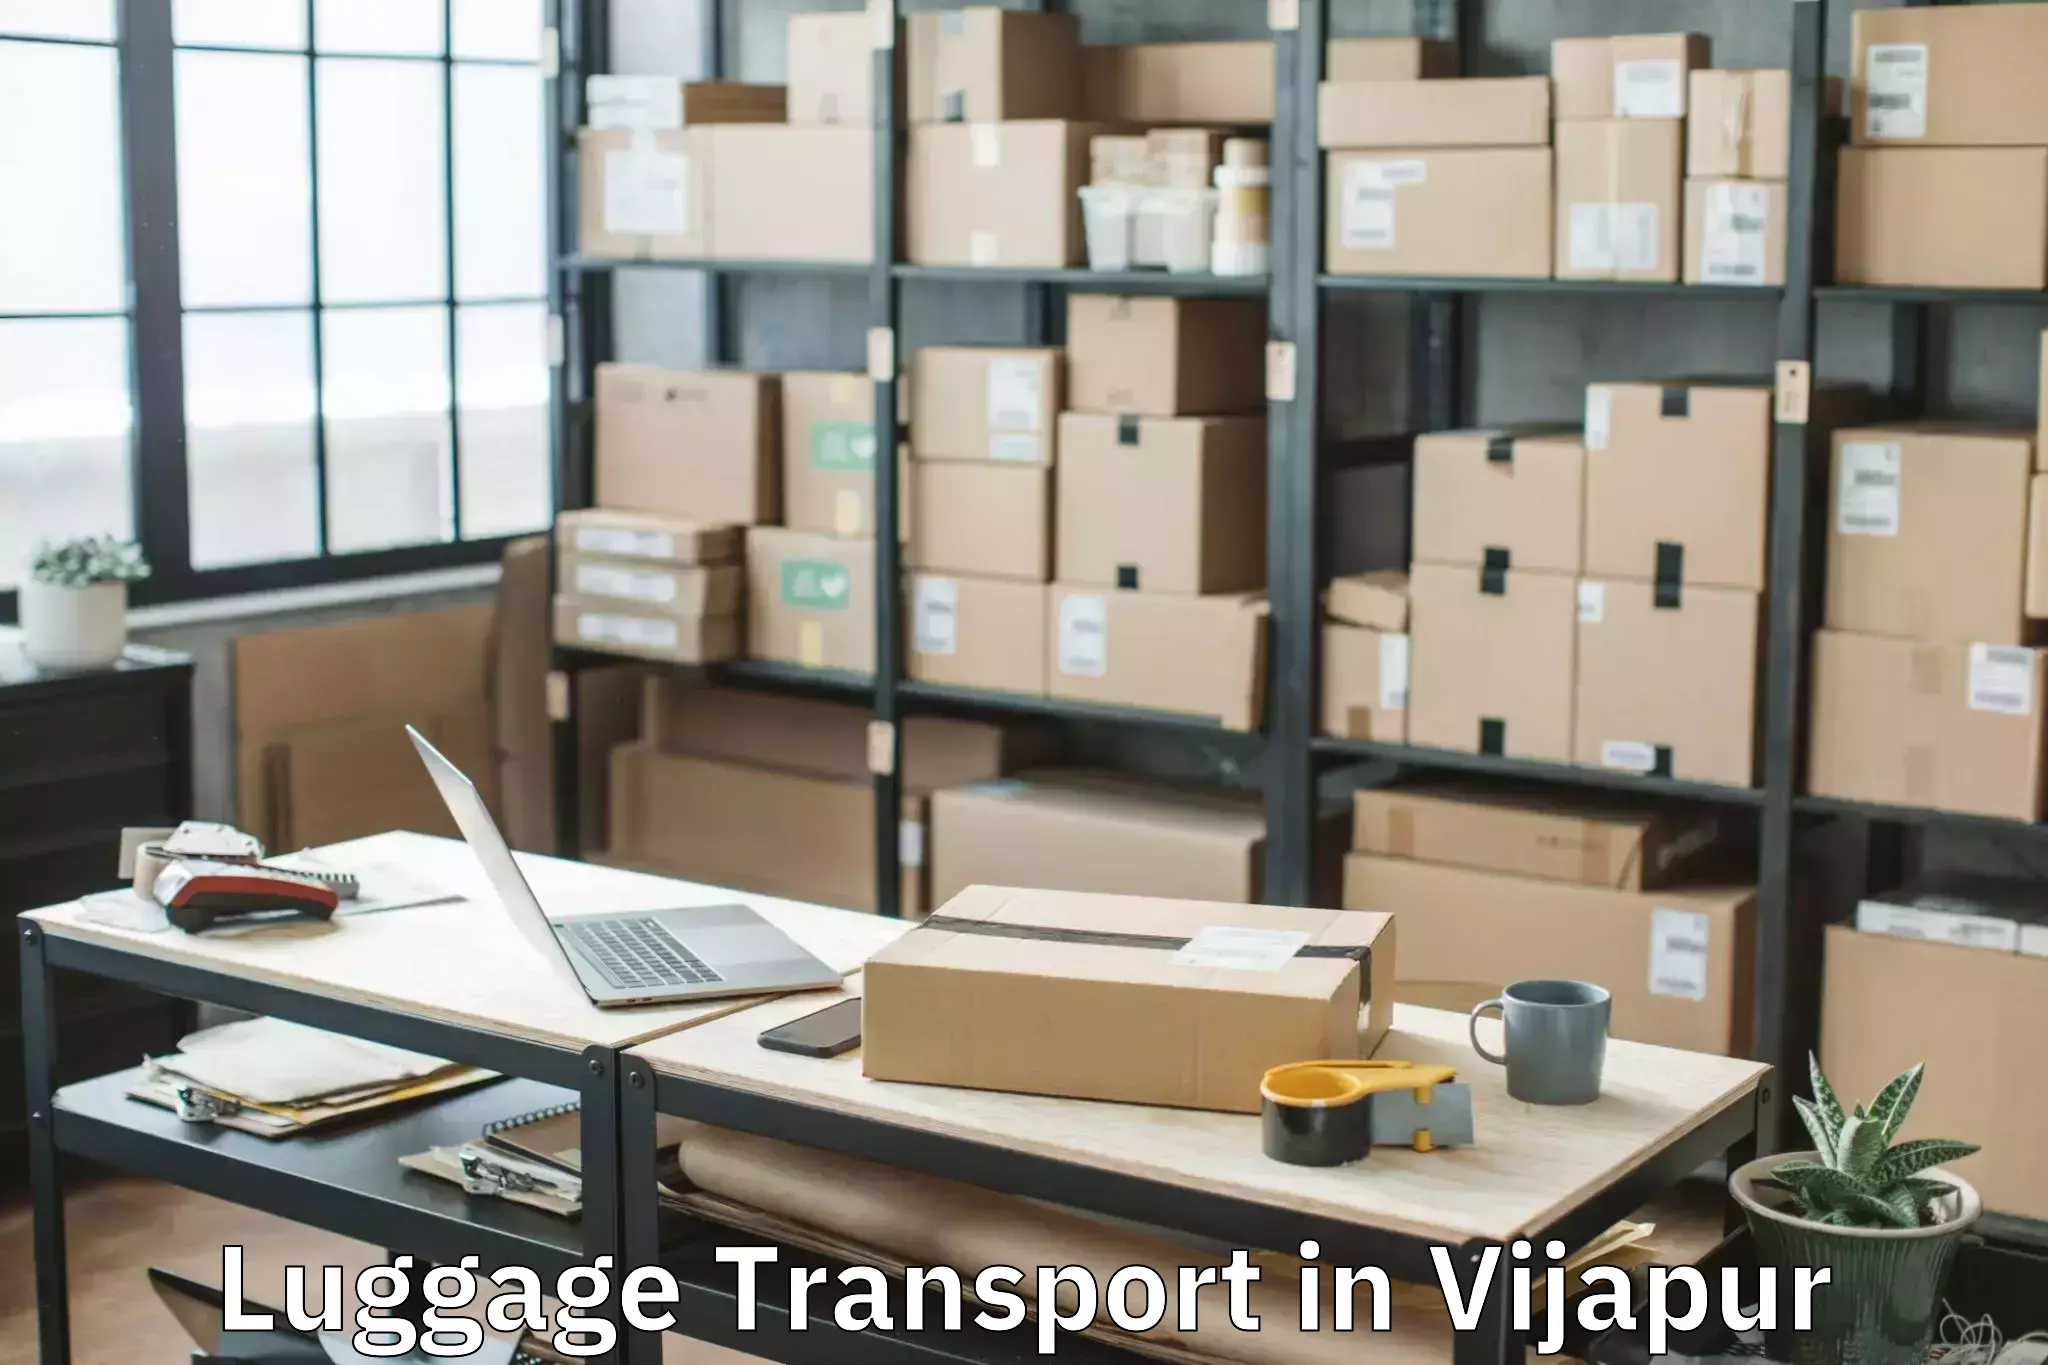 Luggage shipping trends in Vijapur